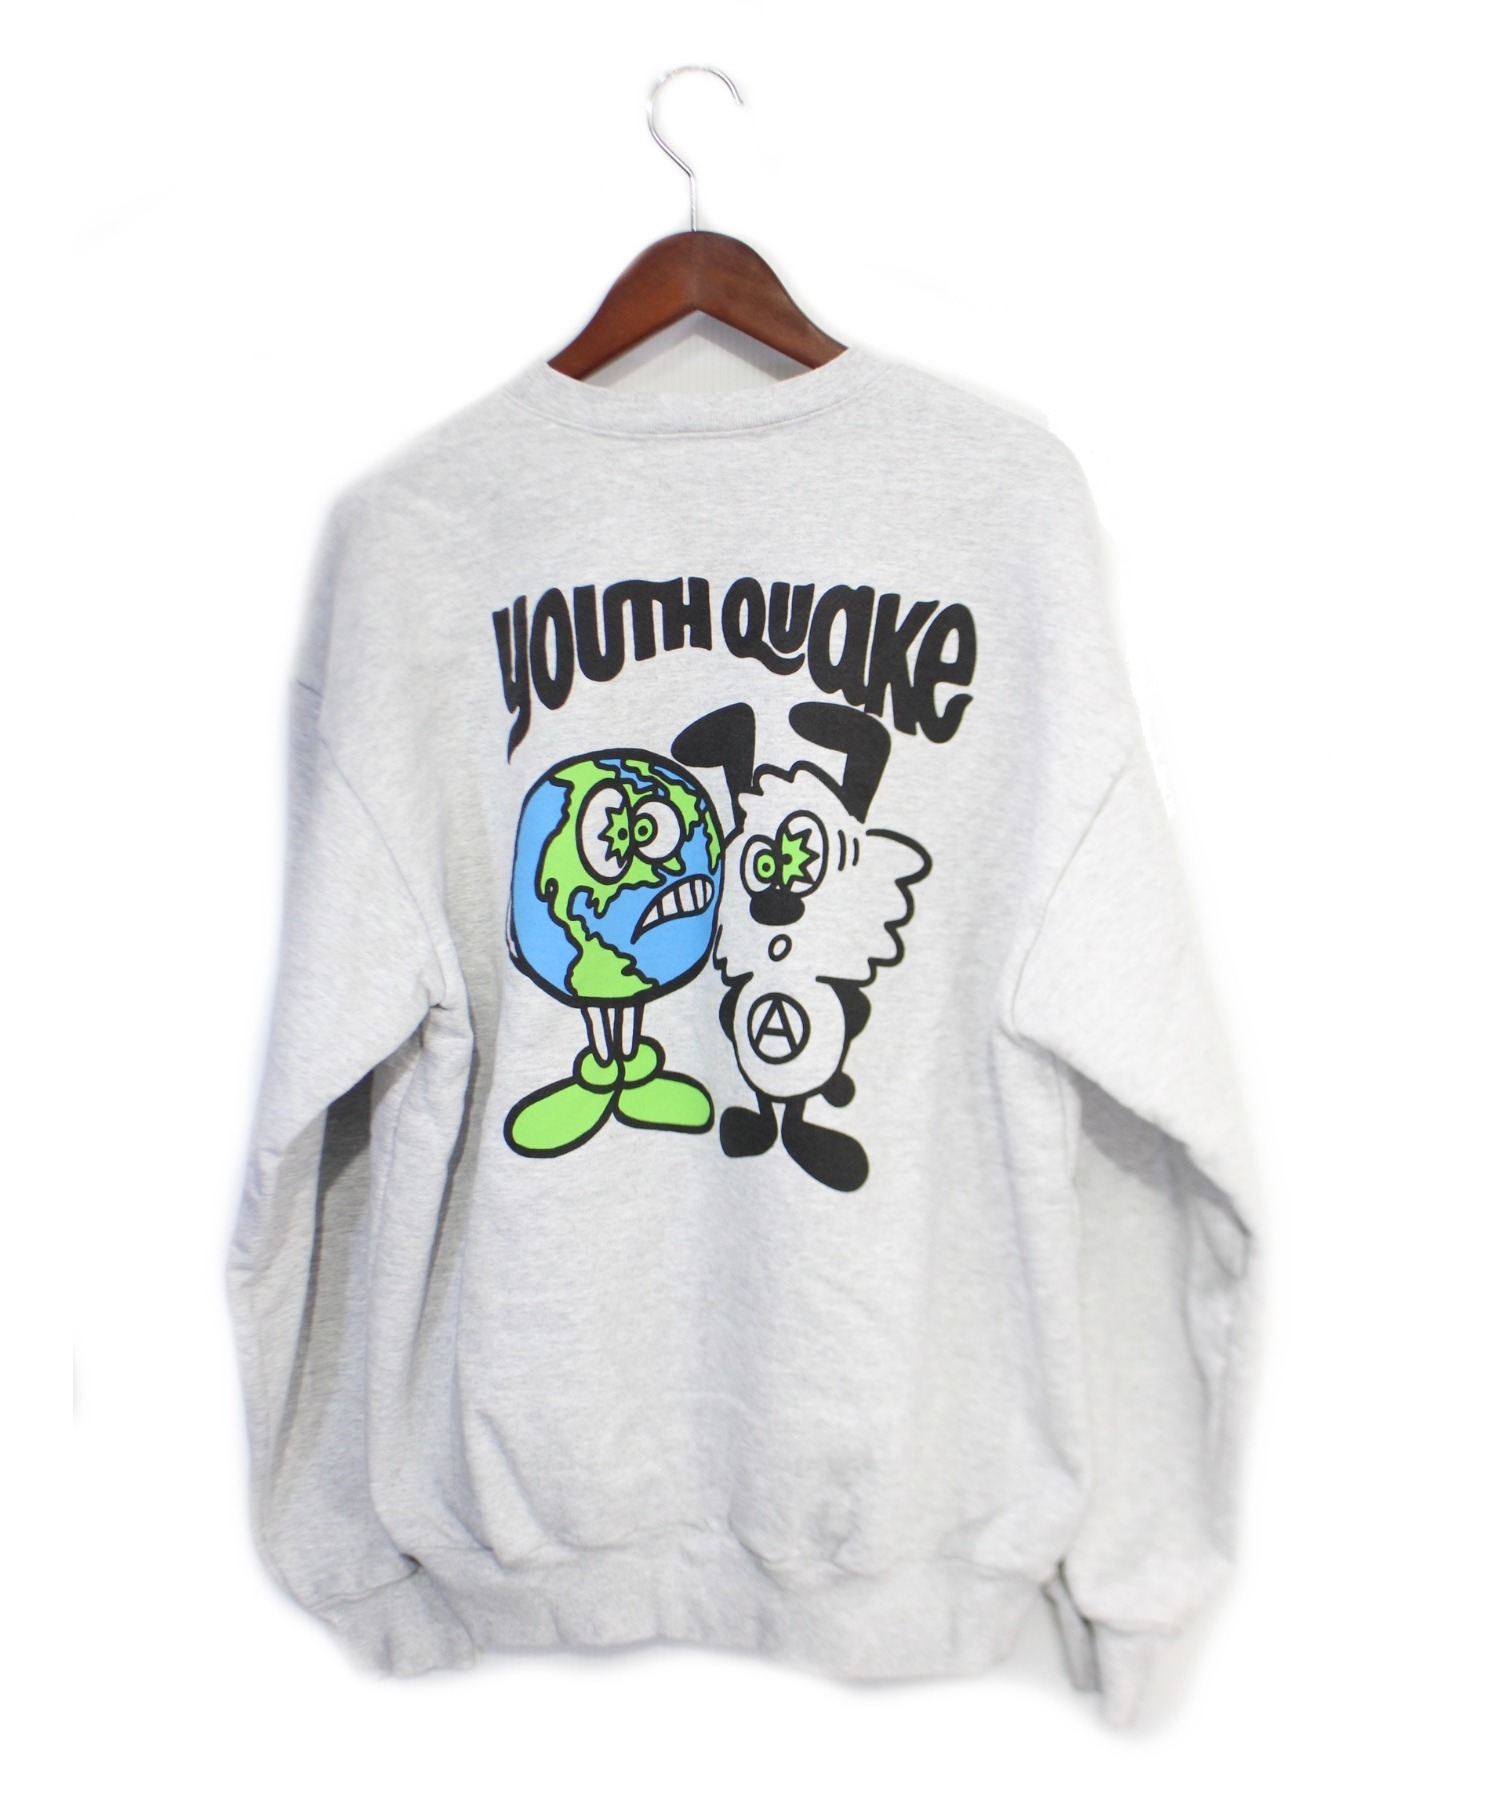 verdy × Youthquake スウェット